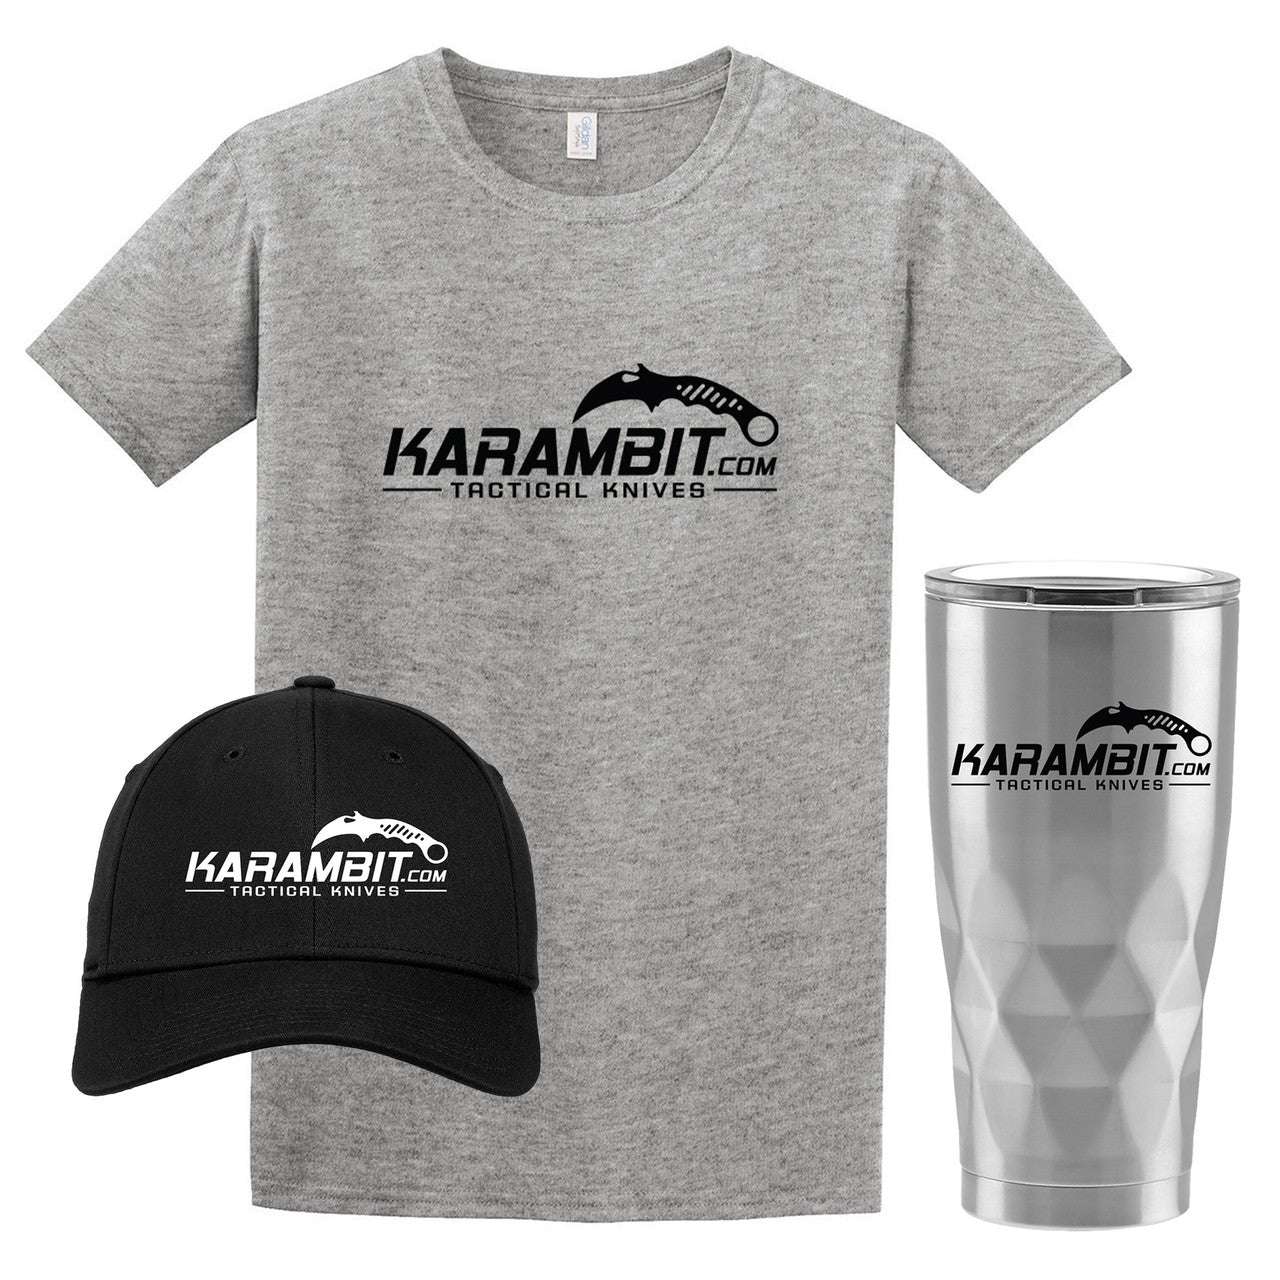 Karambit.com Accessory Bundle. Buy the Hat and Tumbler and the T-Shirt if FREE!